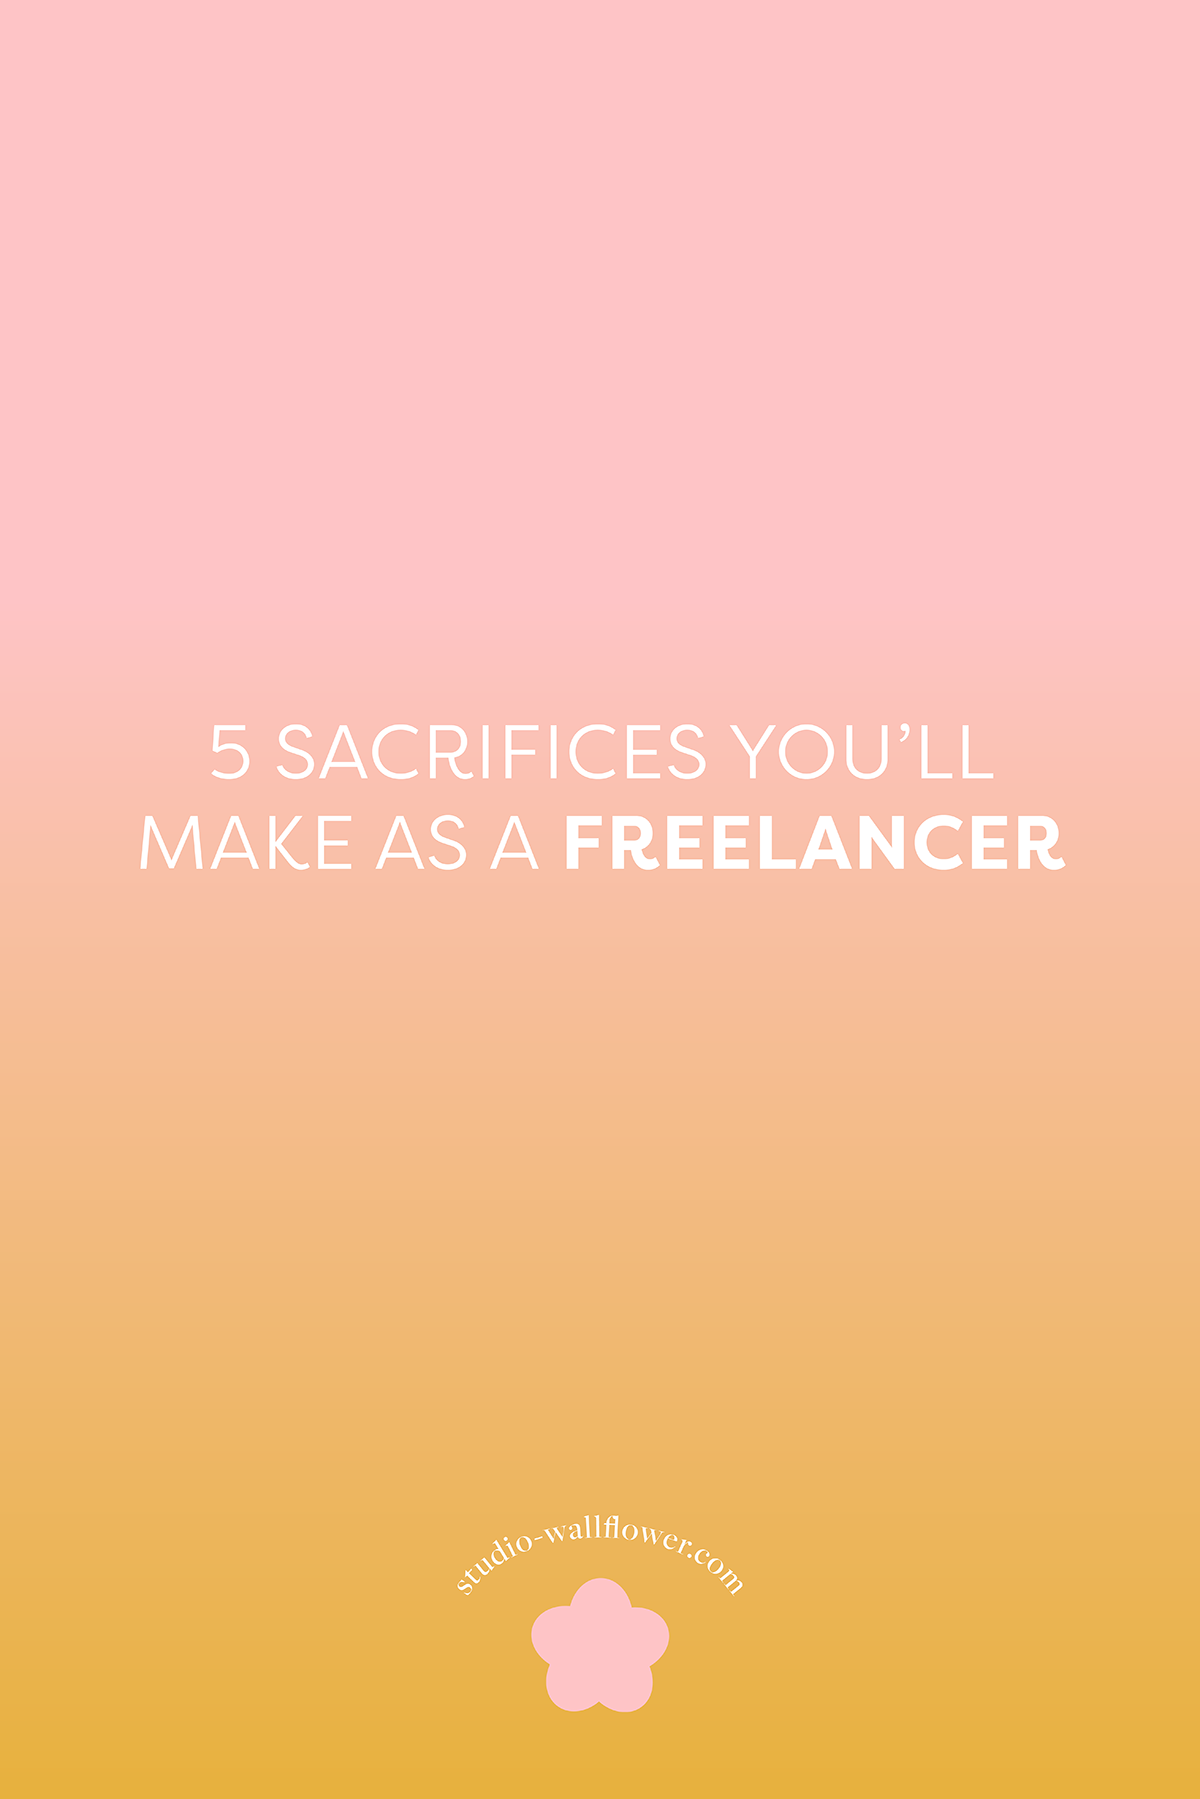 5 Sacrifices You'll Make As A Freelancer - and why they're worth it via wallflower